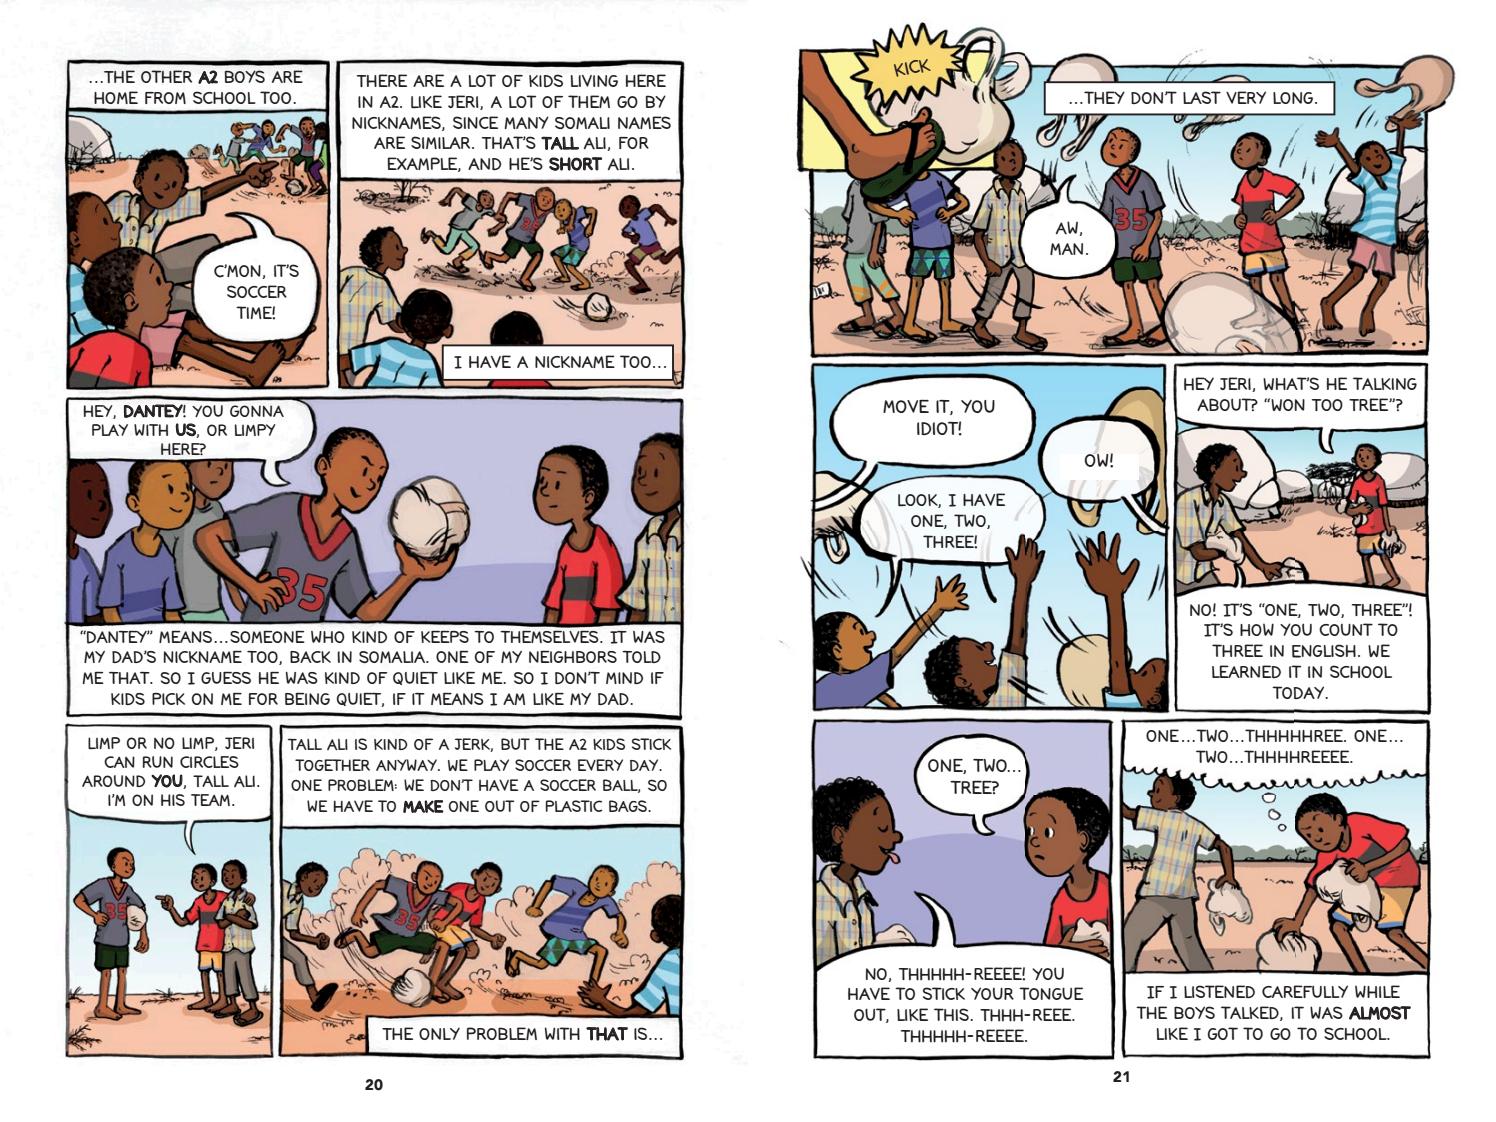 multiple comics panels with images of children in a refugee camp